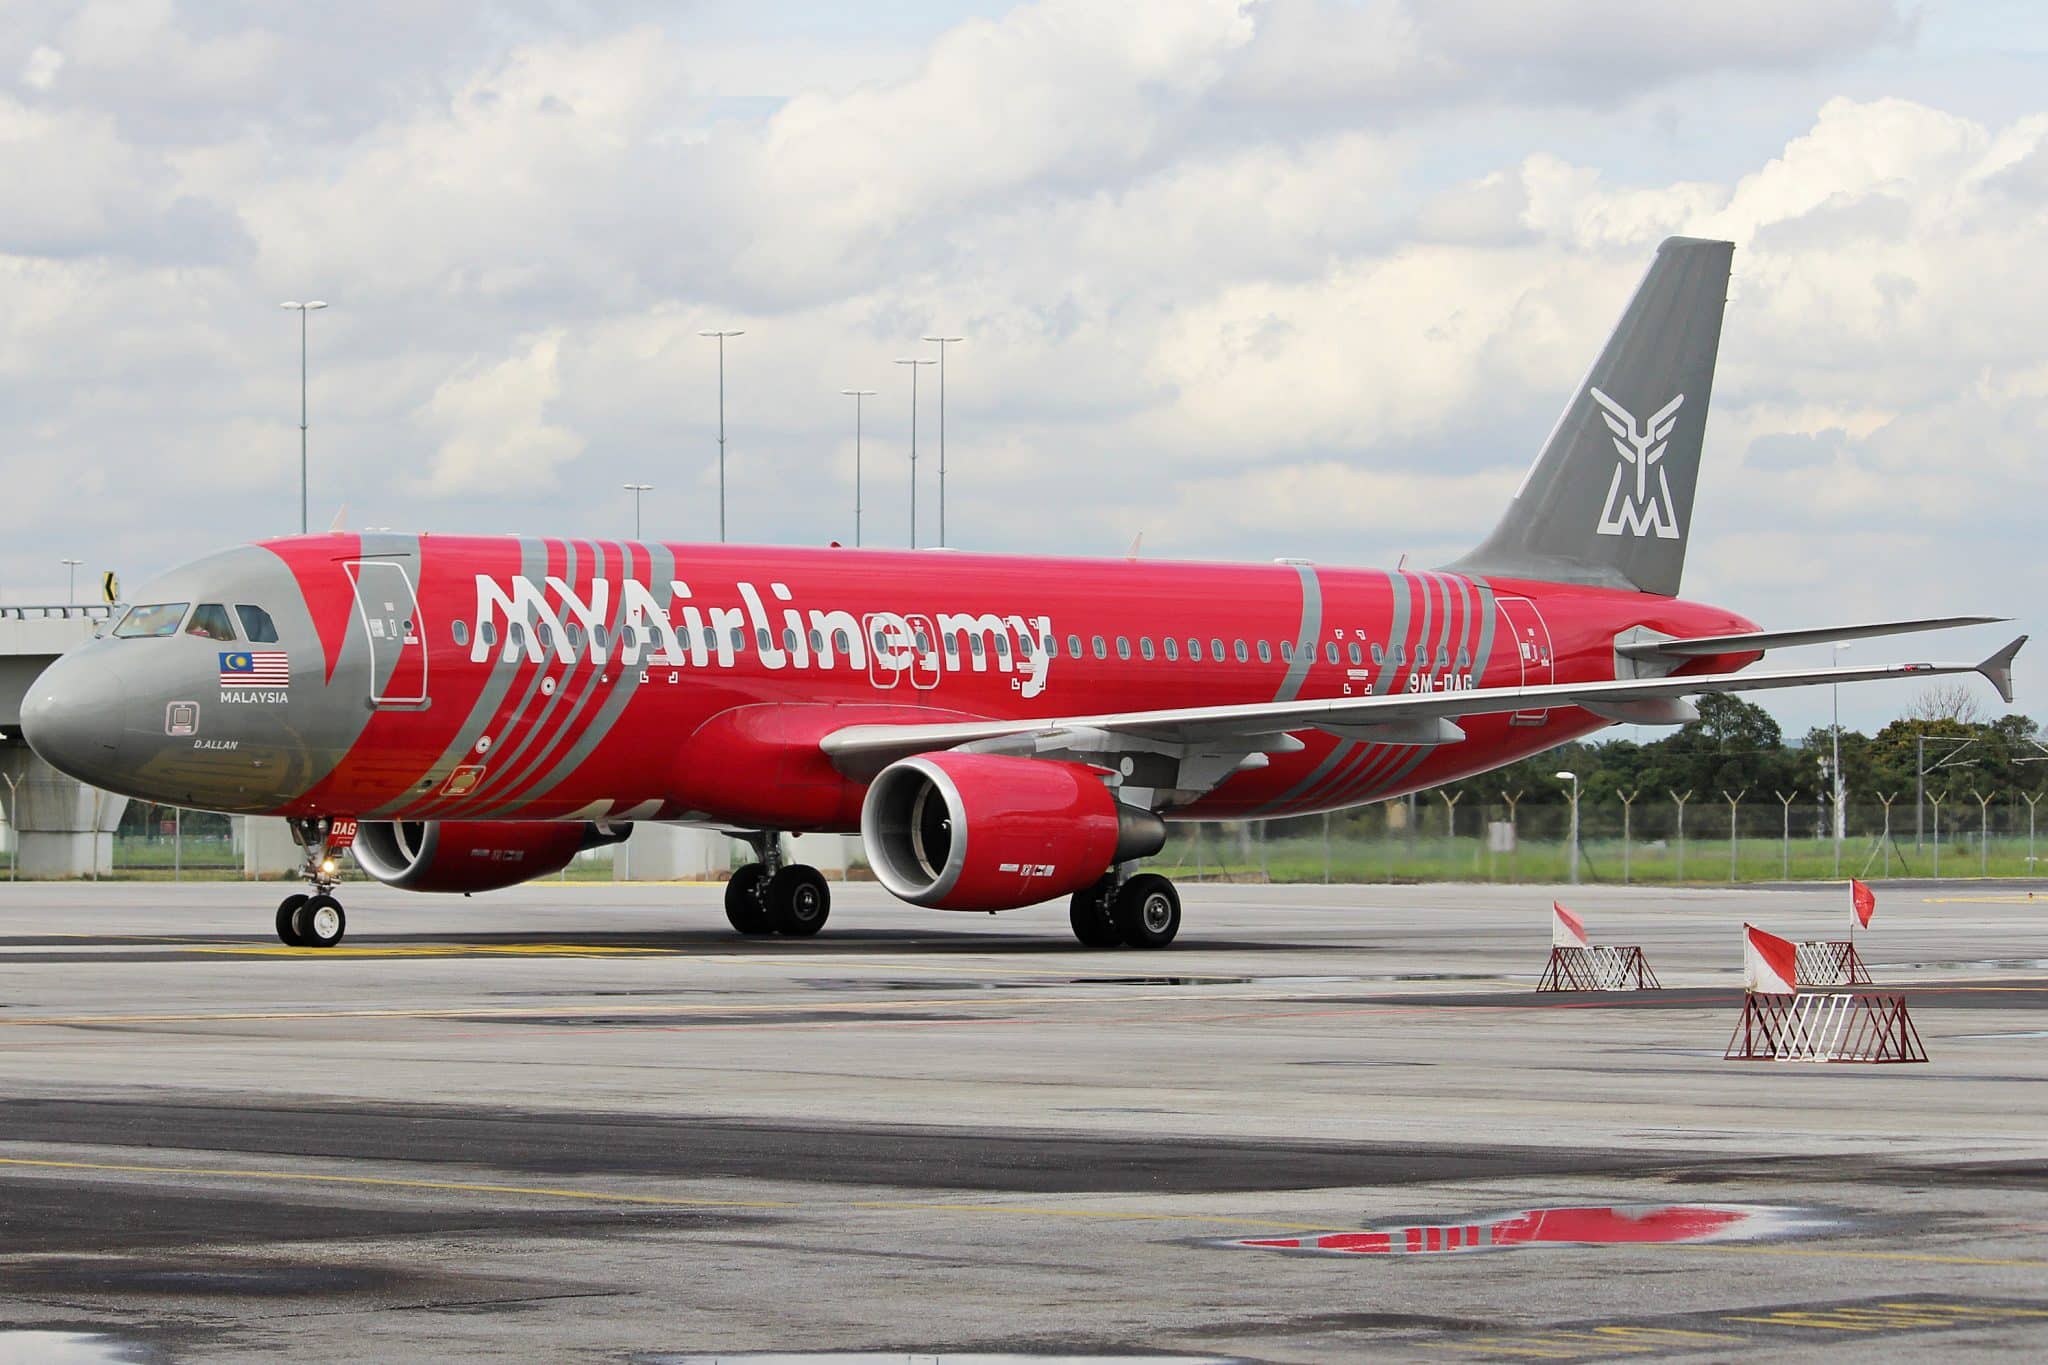 MYAirline Supports Malaysia's Festivals with Fixed Fare Offering